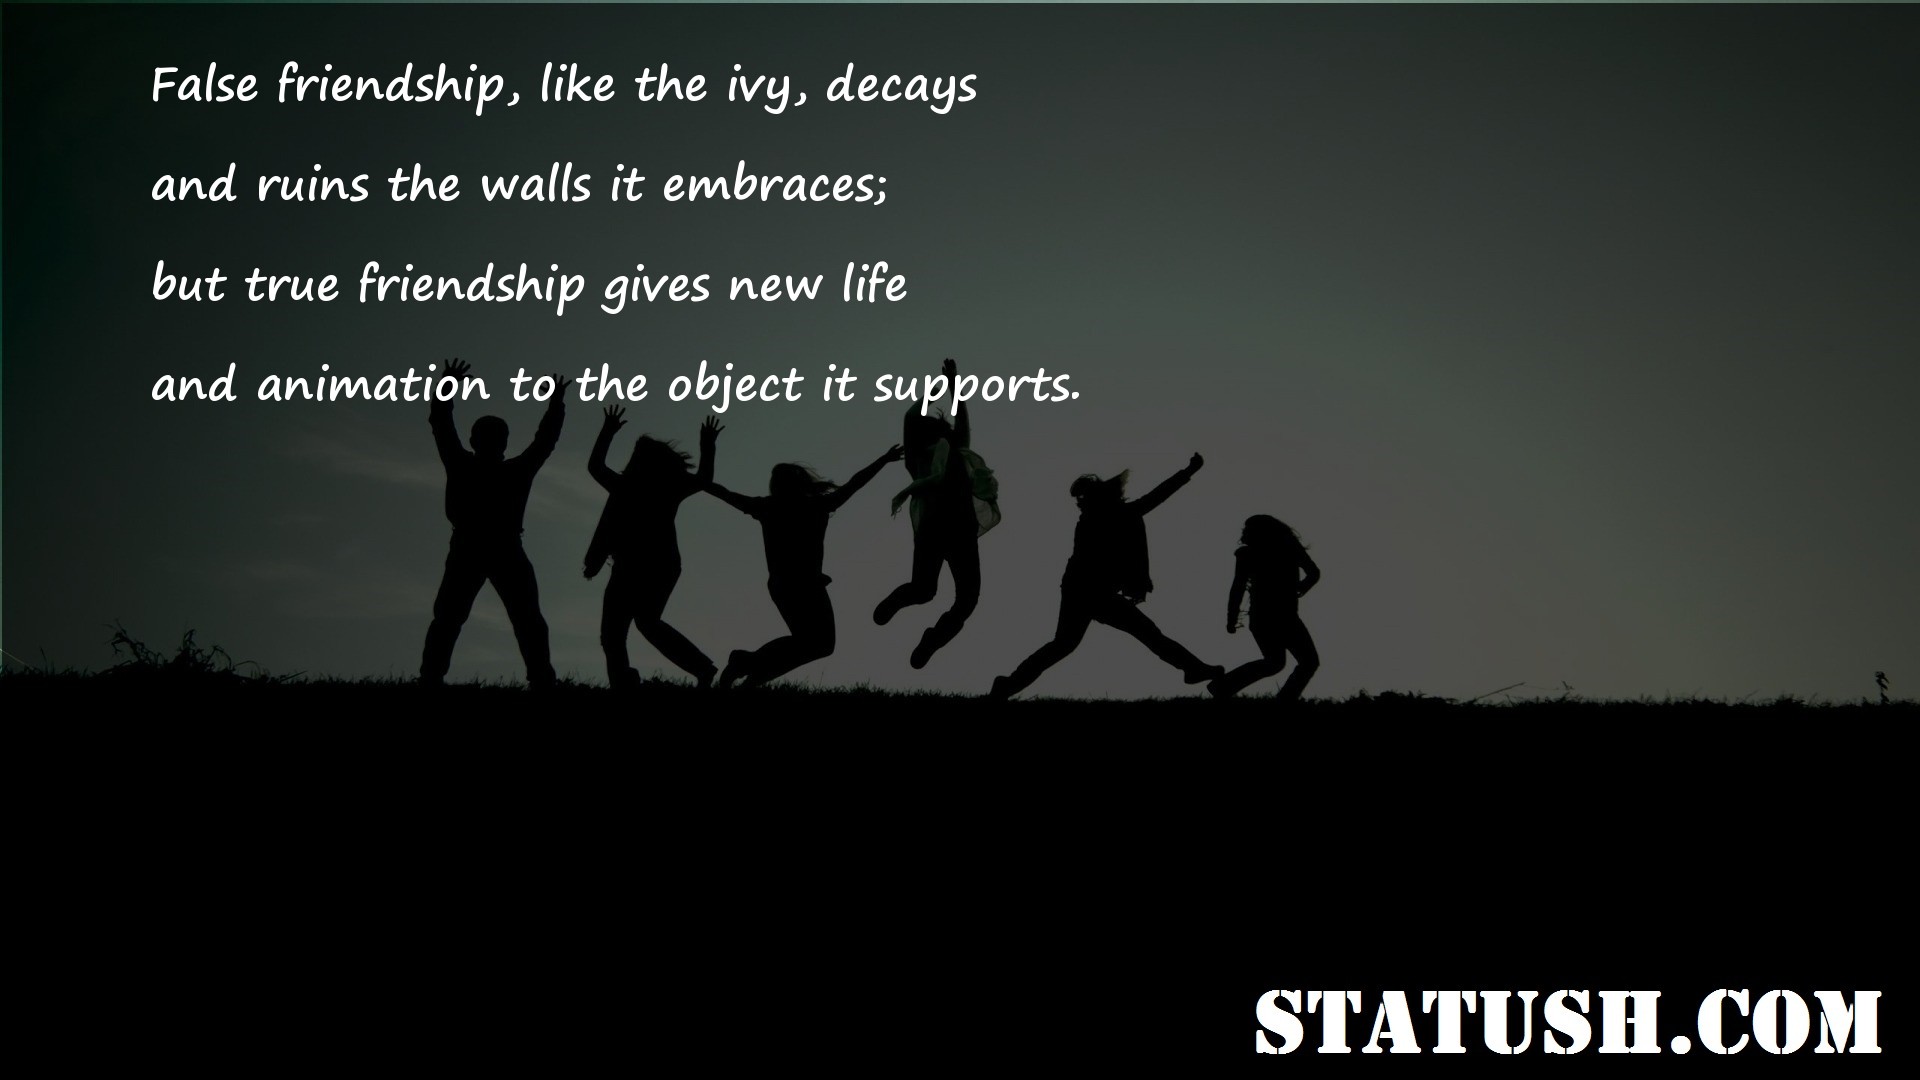 False friendship like the ivy decays - Friendship Quotes at statush.com